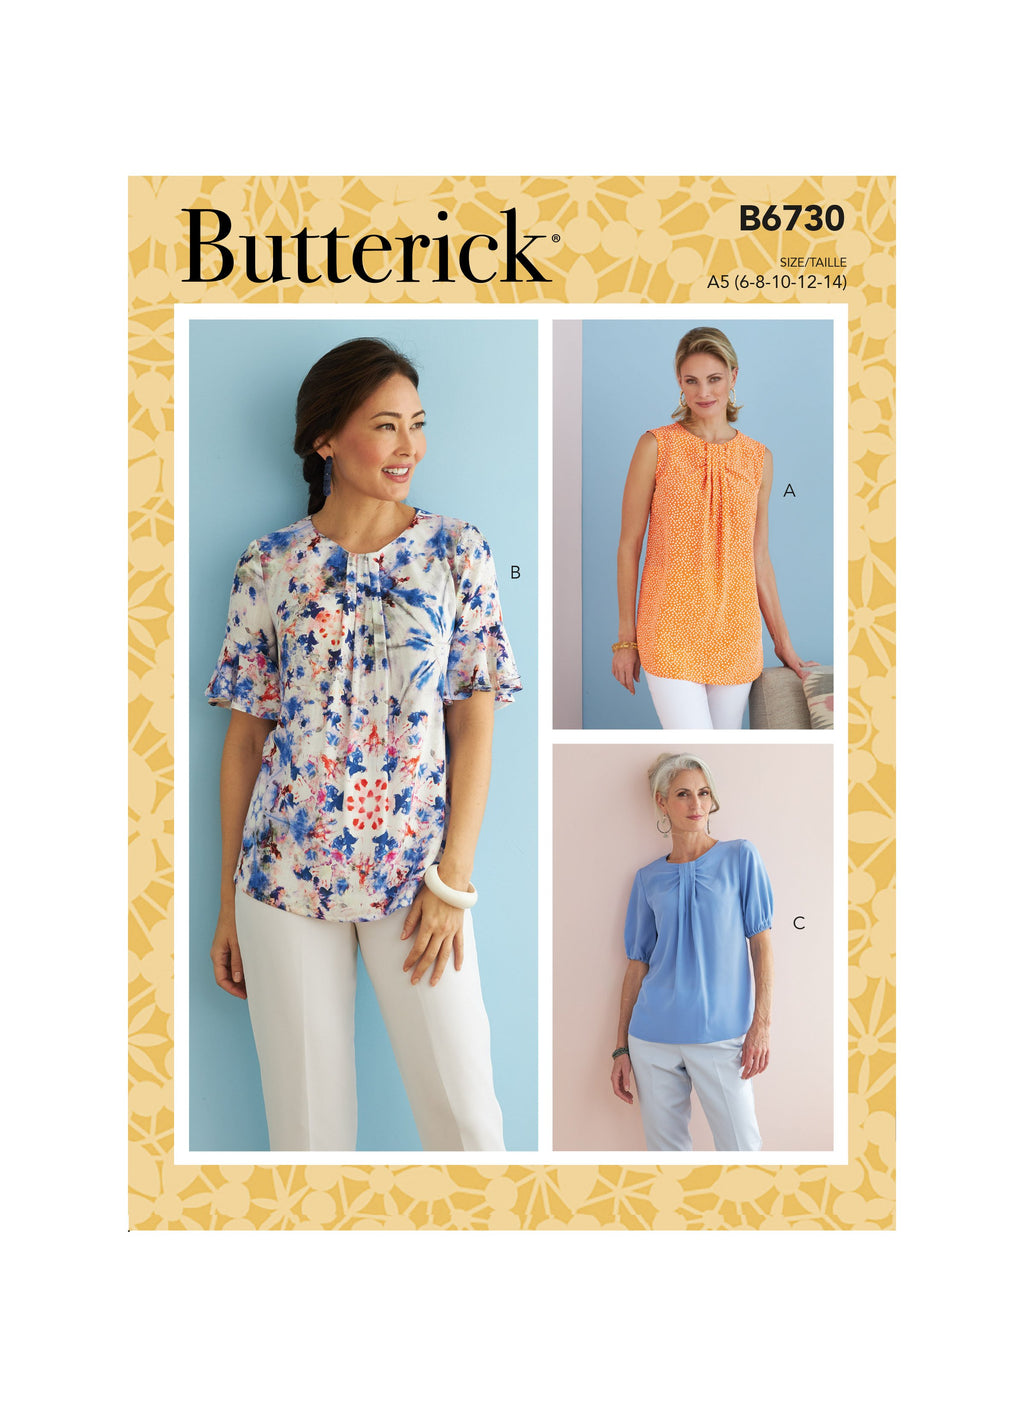 Butterick Sewing Pattern 6730 Misses' Top